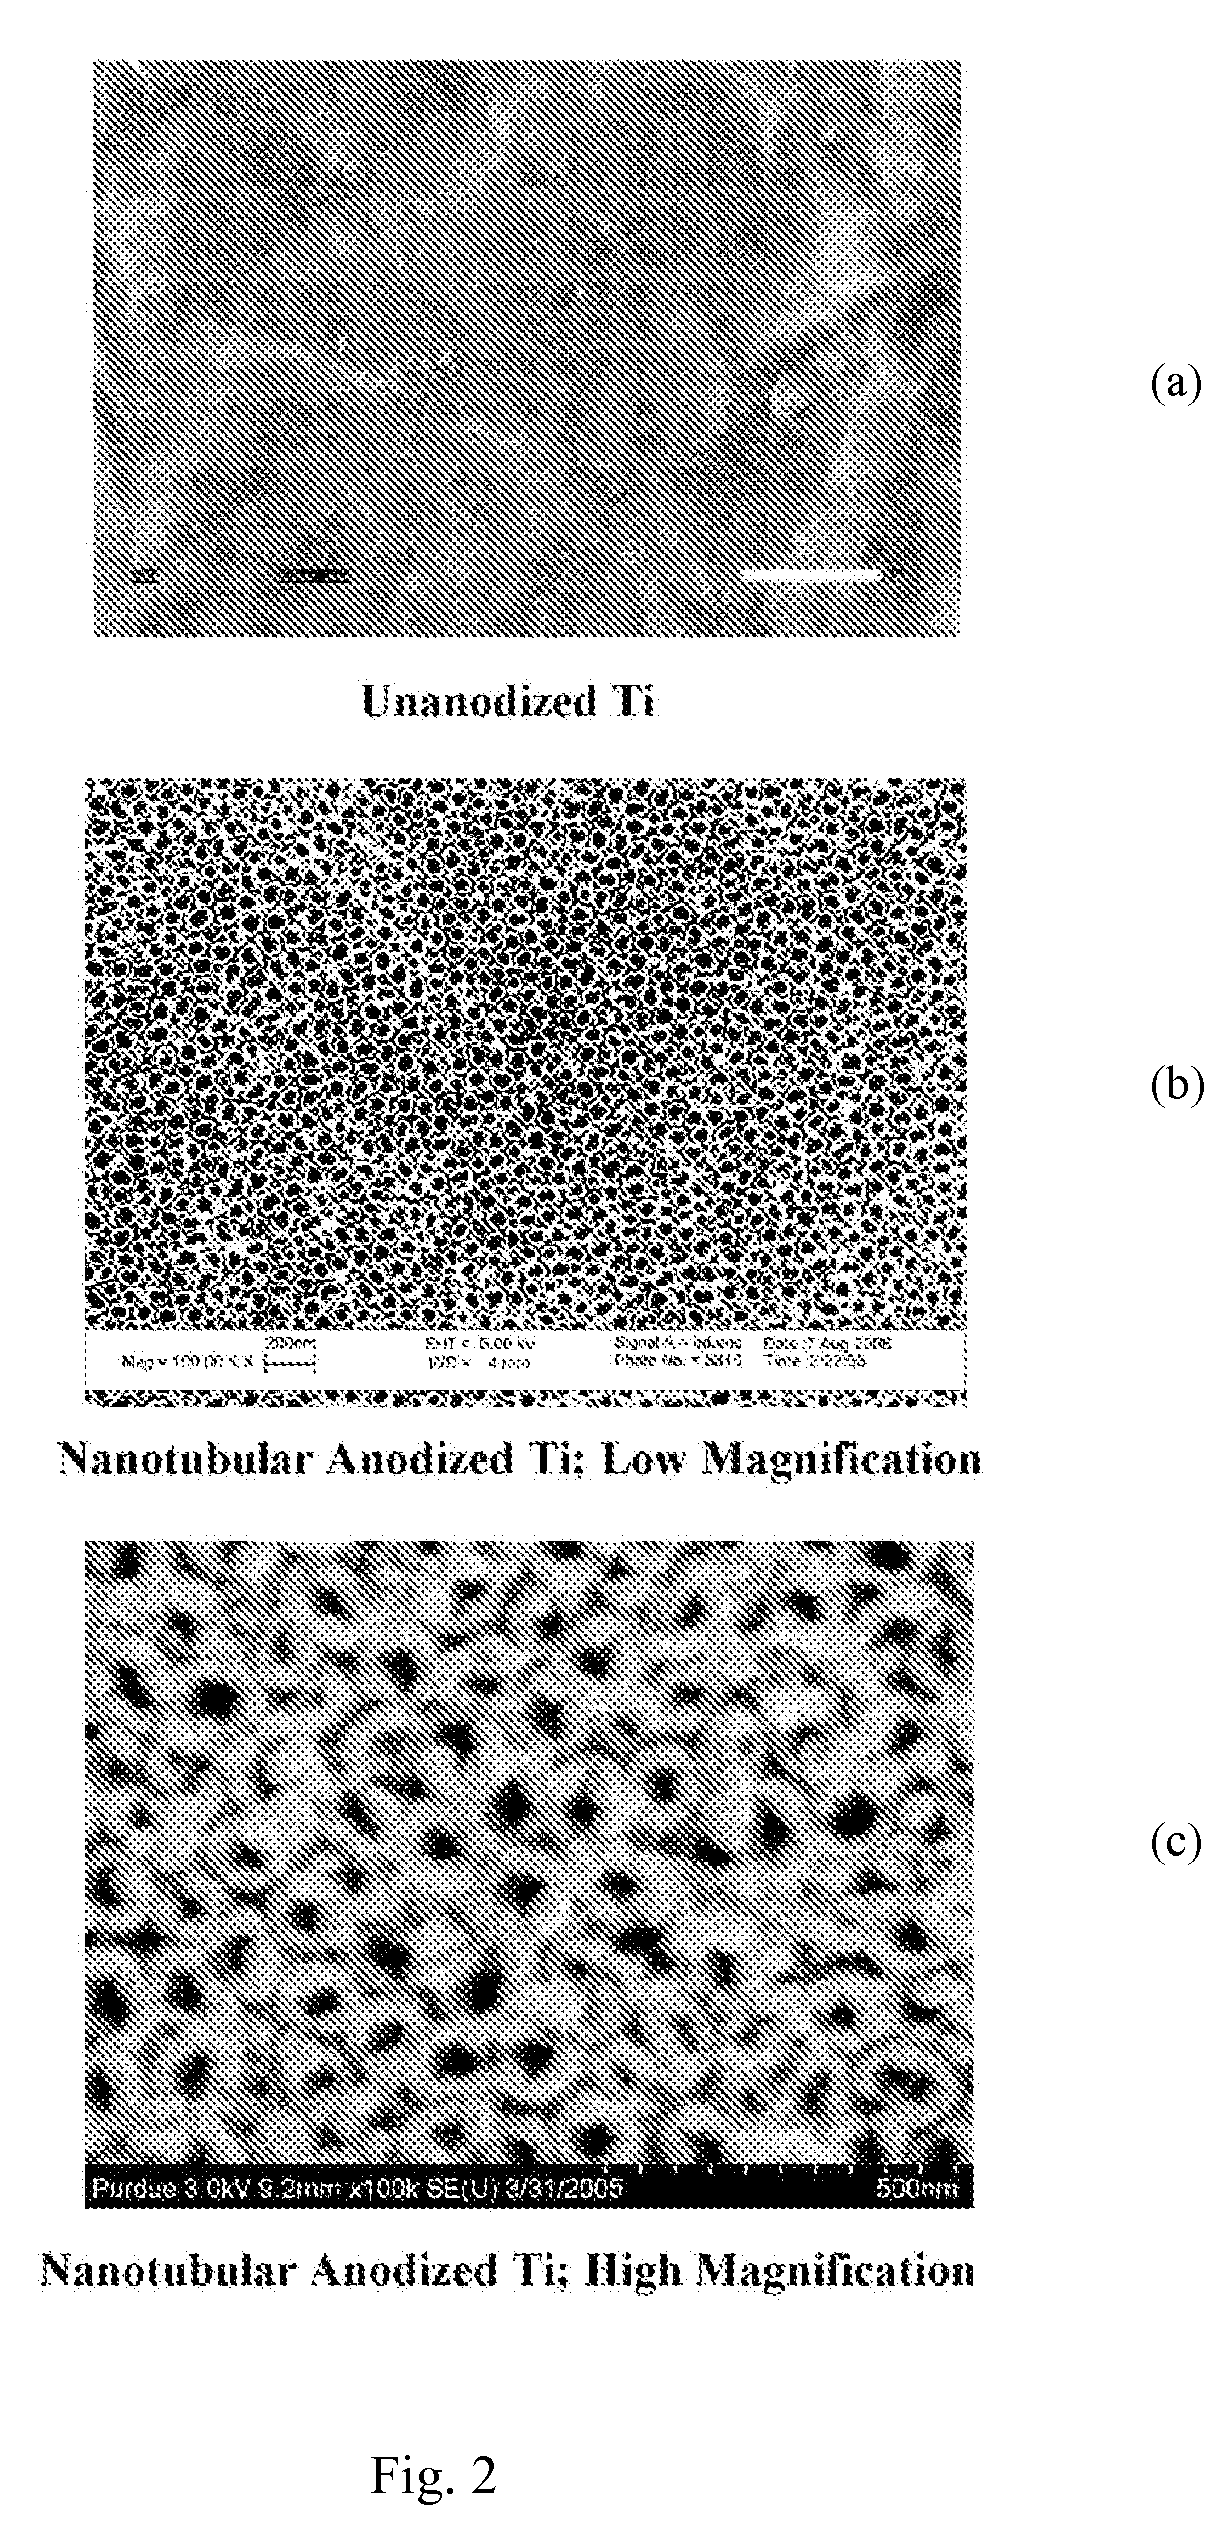 Method for producing nanostructures on a surface of a medical implant